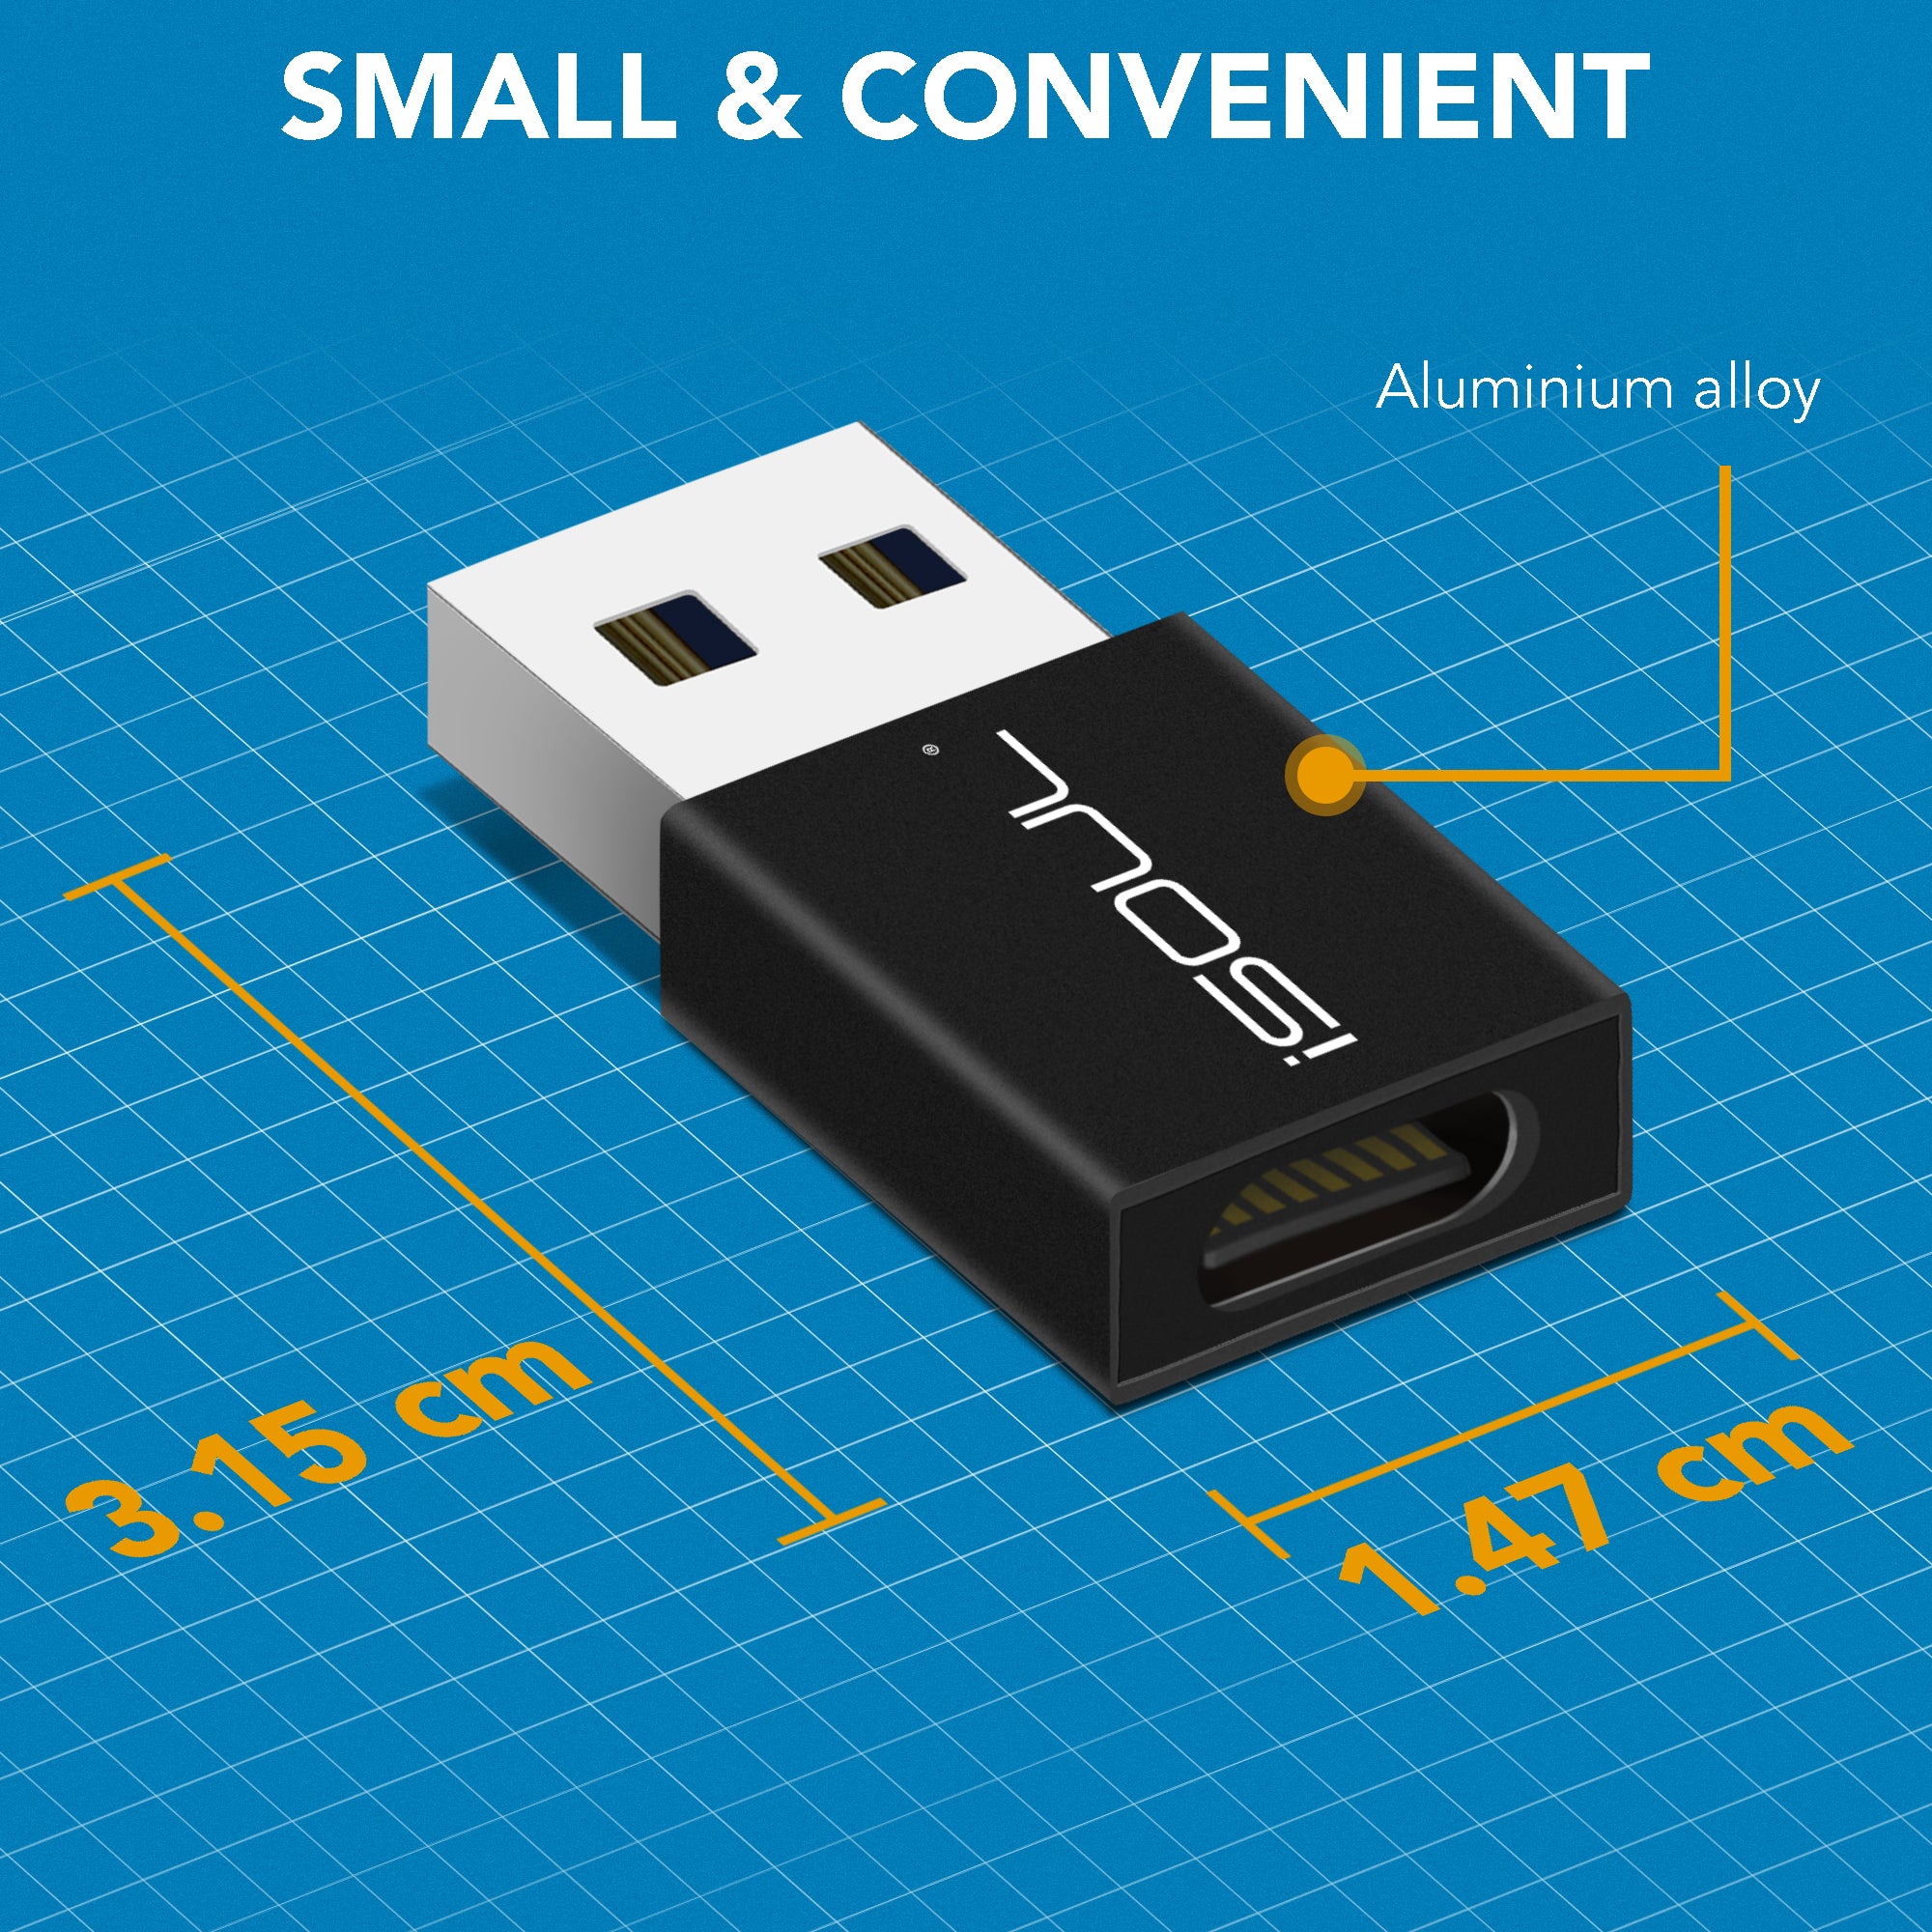 USB 3.0 Type-A Male To USB Type-C Female Connector Converter - Black